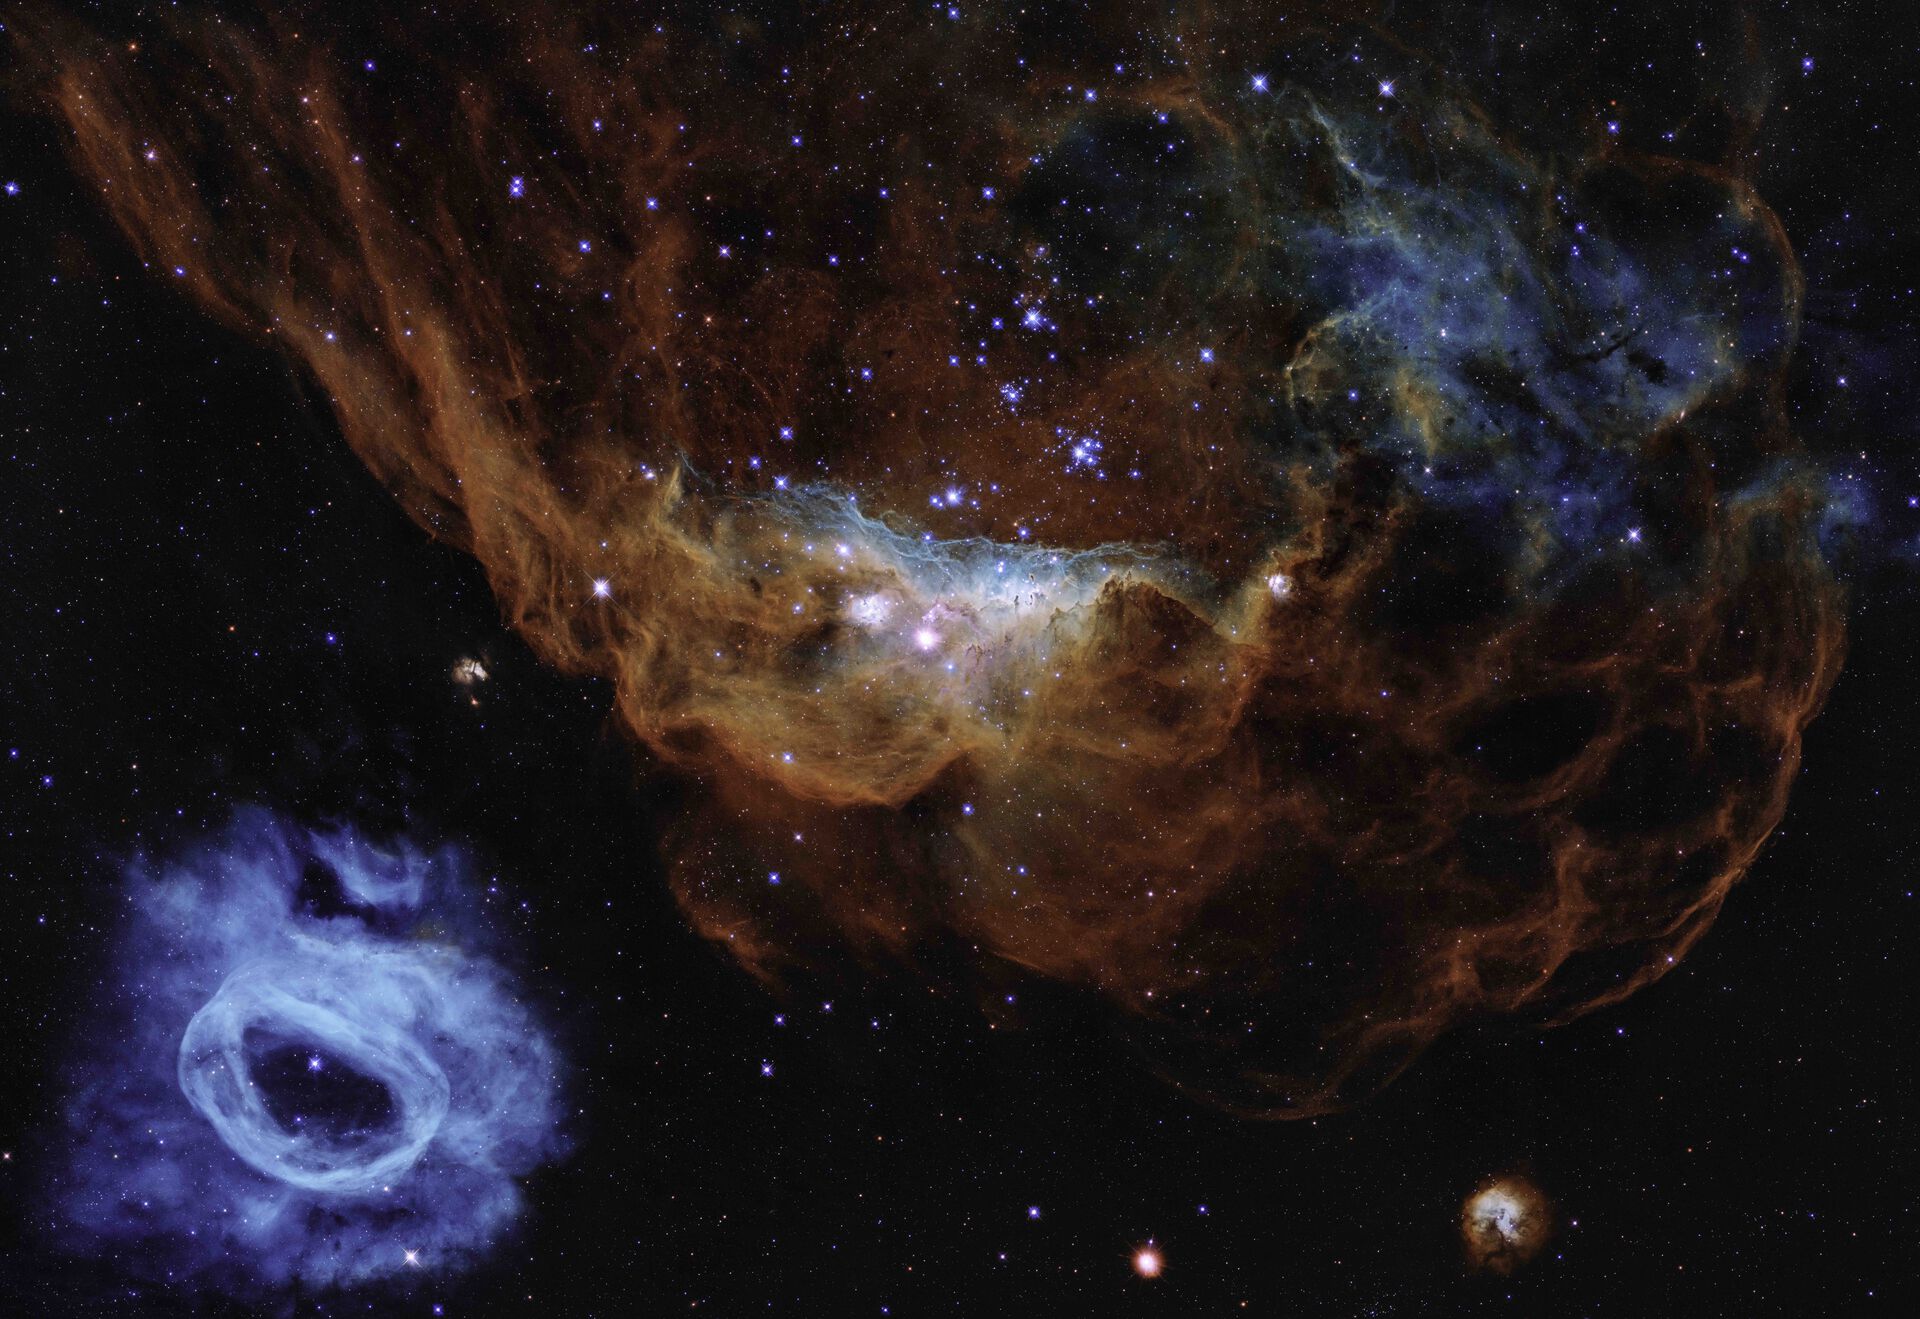 A giant nebula and a satellite galaxy of a vast star-forming region in the Large Magellanic Cloud.